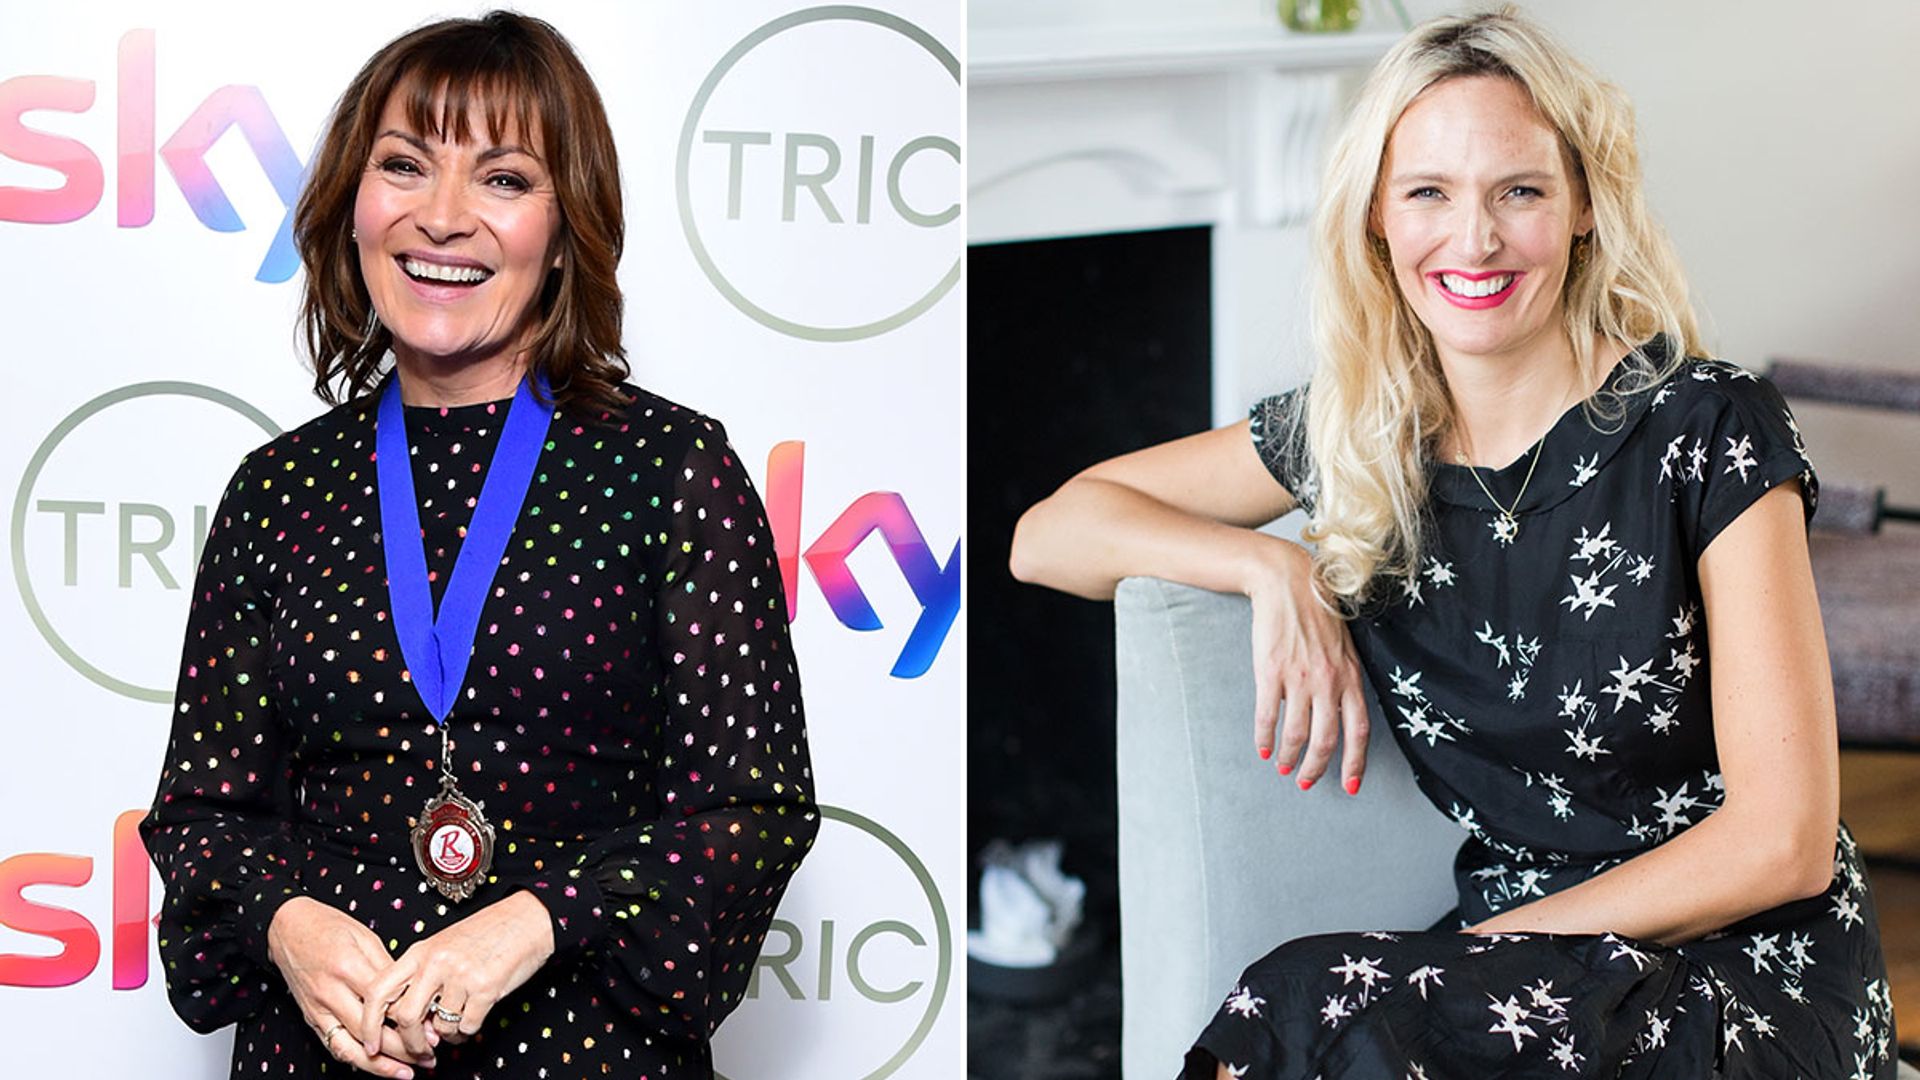 Lorraine Kelly joins life coach Rosie Dalling to talk kindness and self-compassion